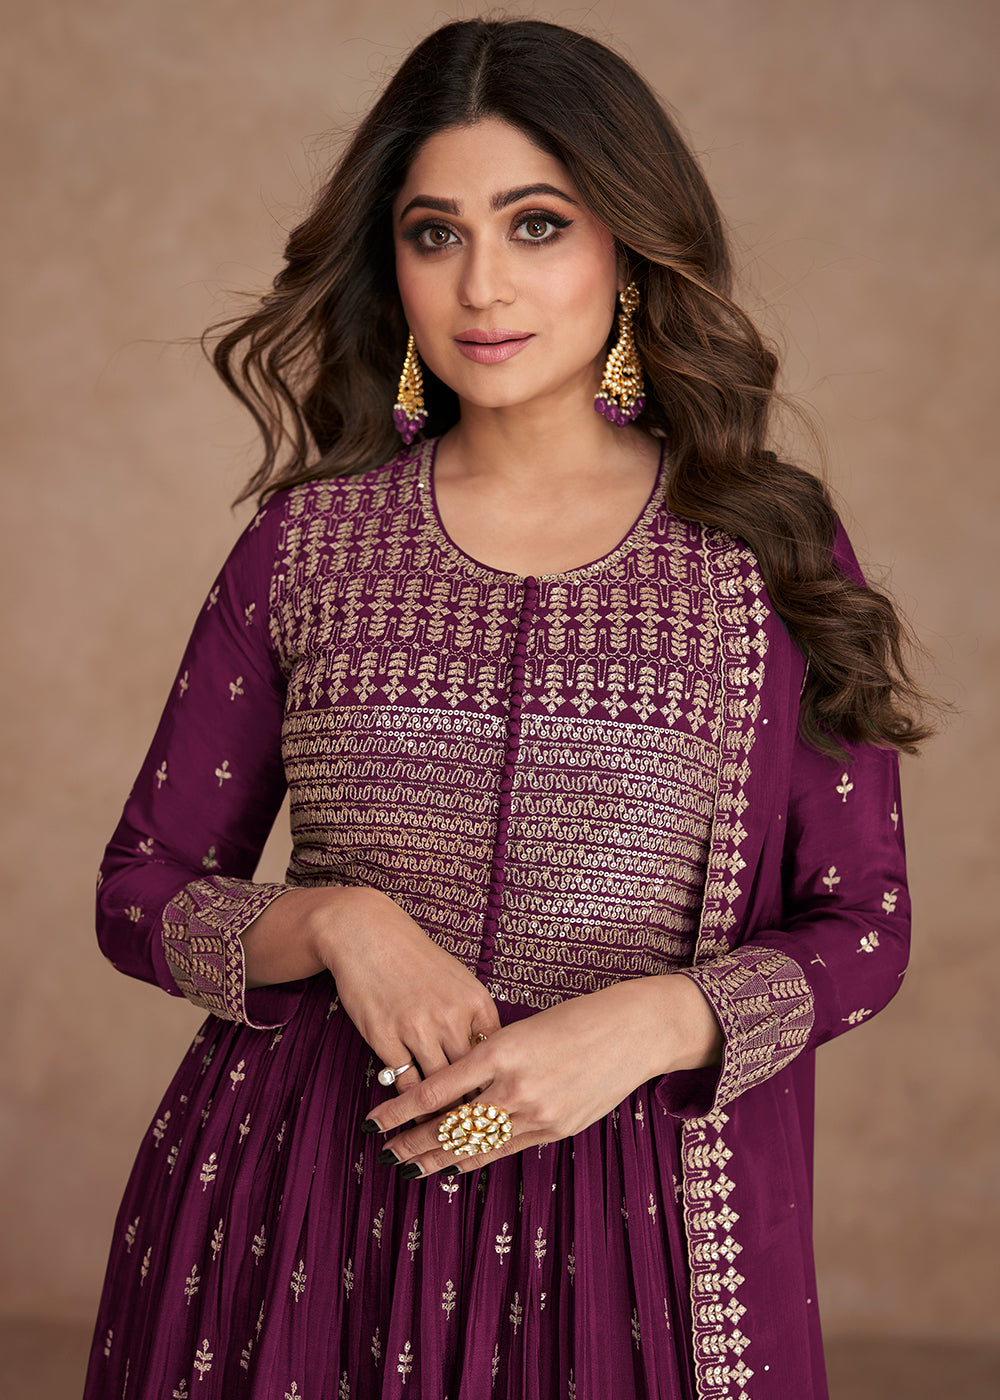 Buy Now Festive Look Wonderful Plum Wine Zari Embroidered Palazzo Suit Online in USA, UK, Canada, Germany, Australia & Worldwide at Empress Clothing.